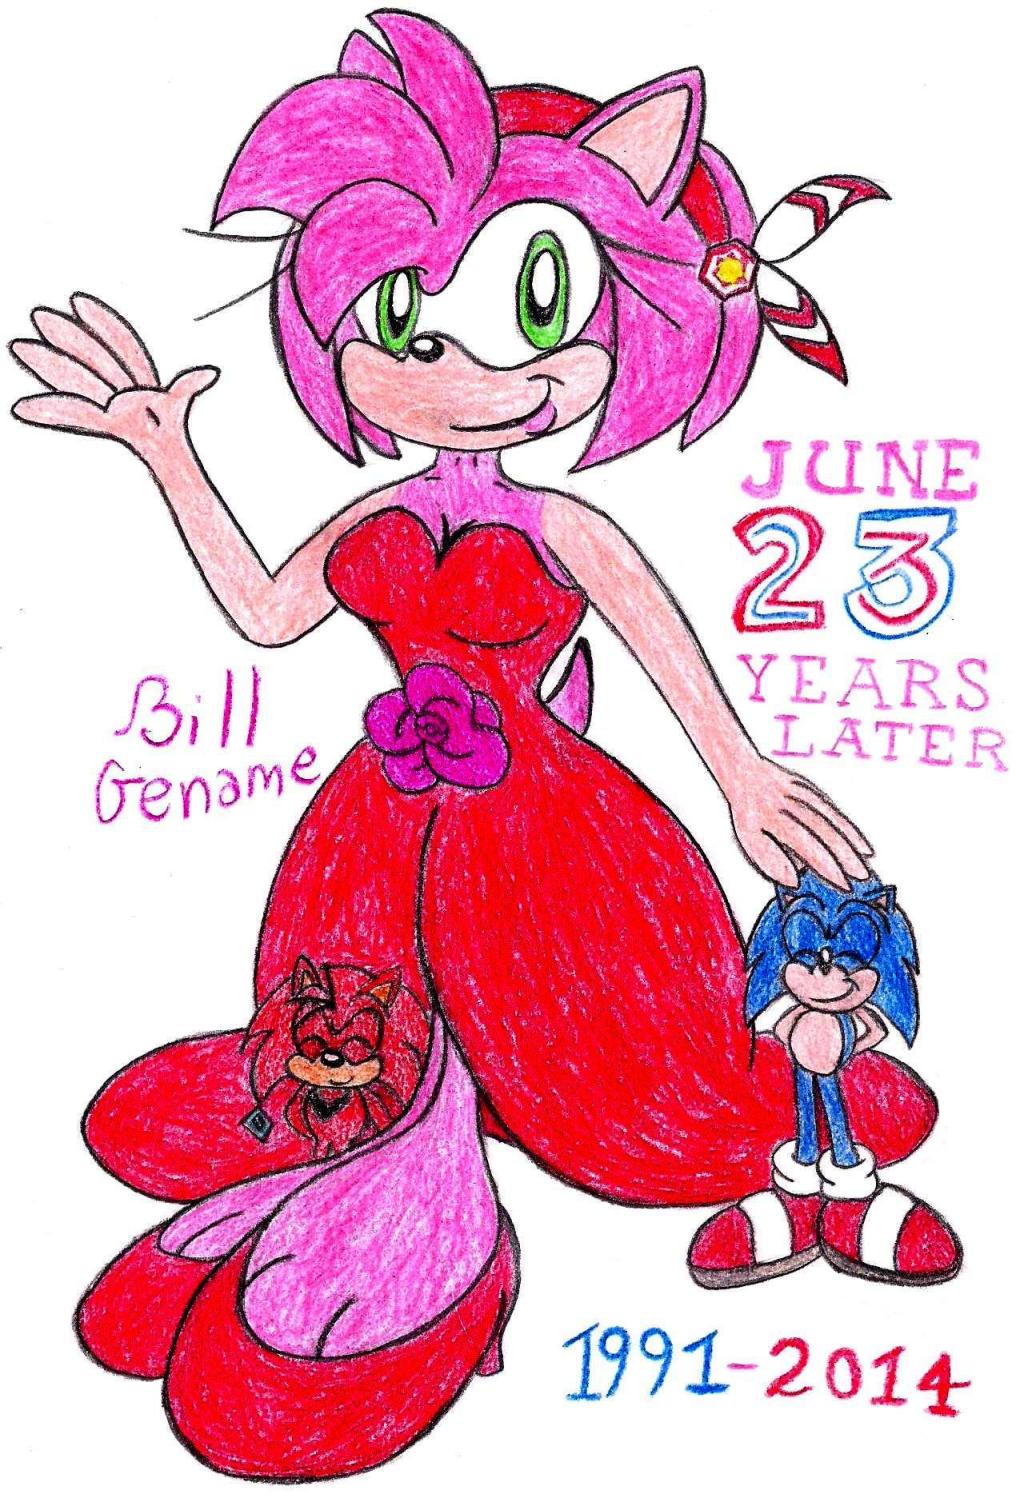 June 23 Years Later by germanname